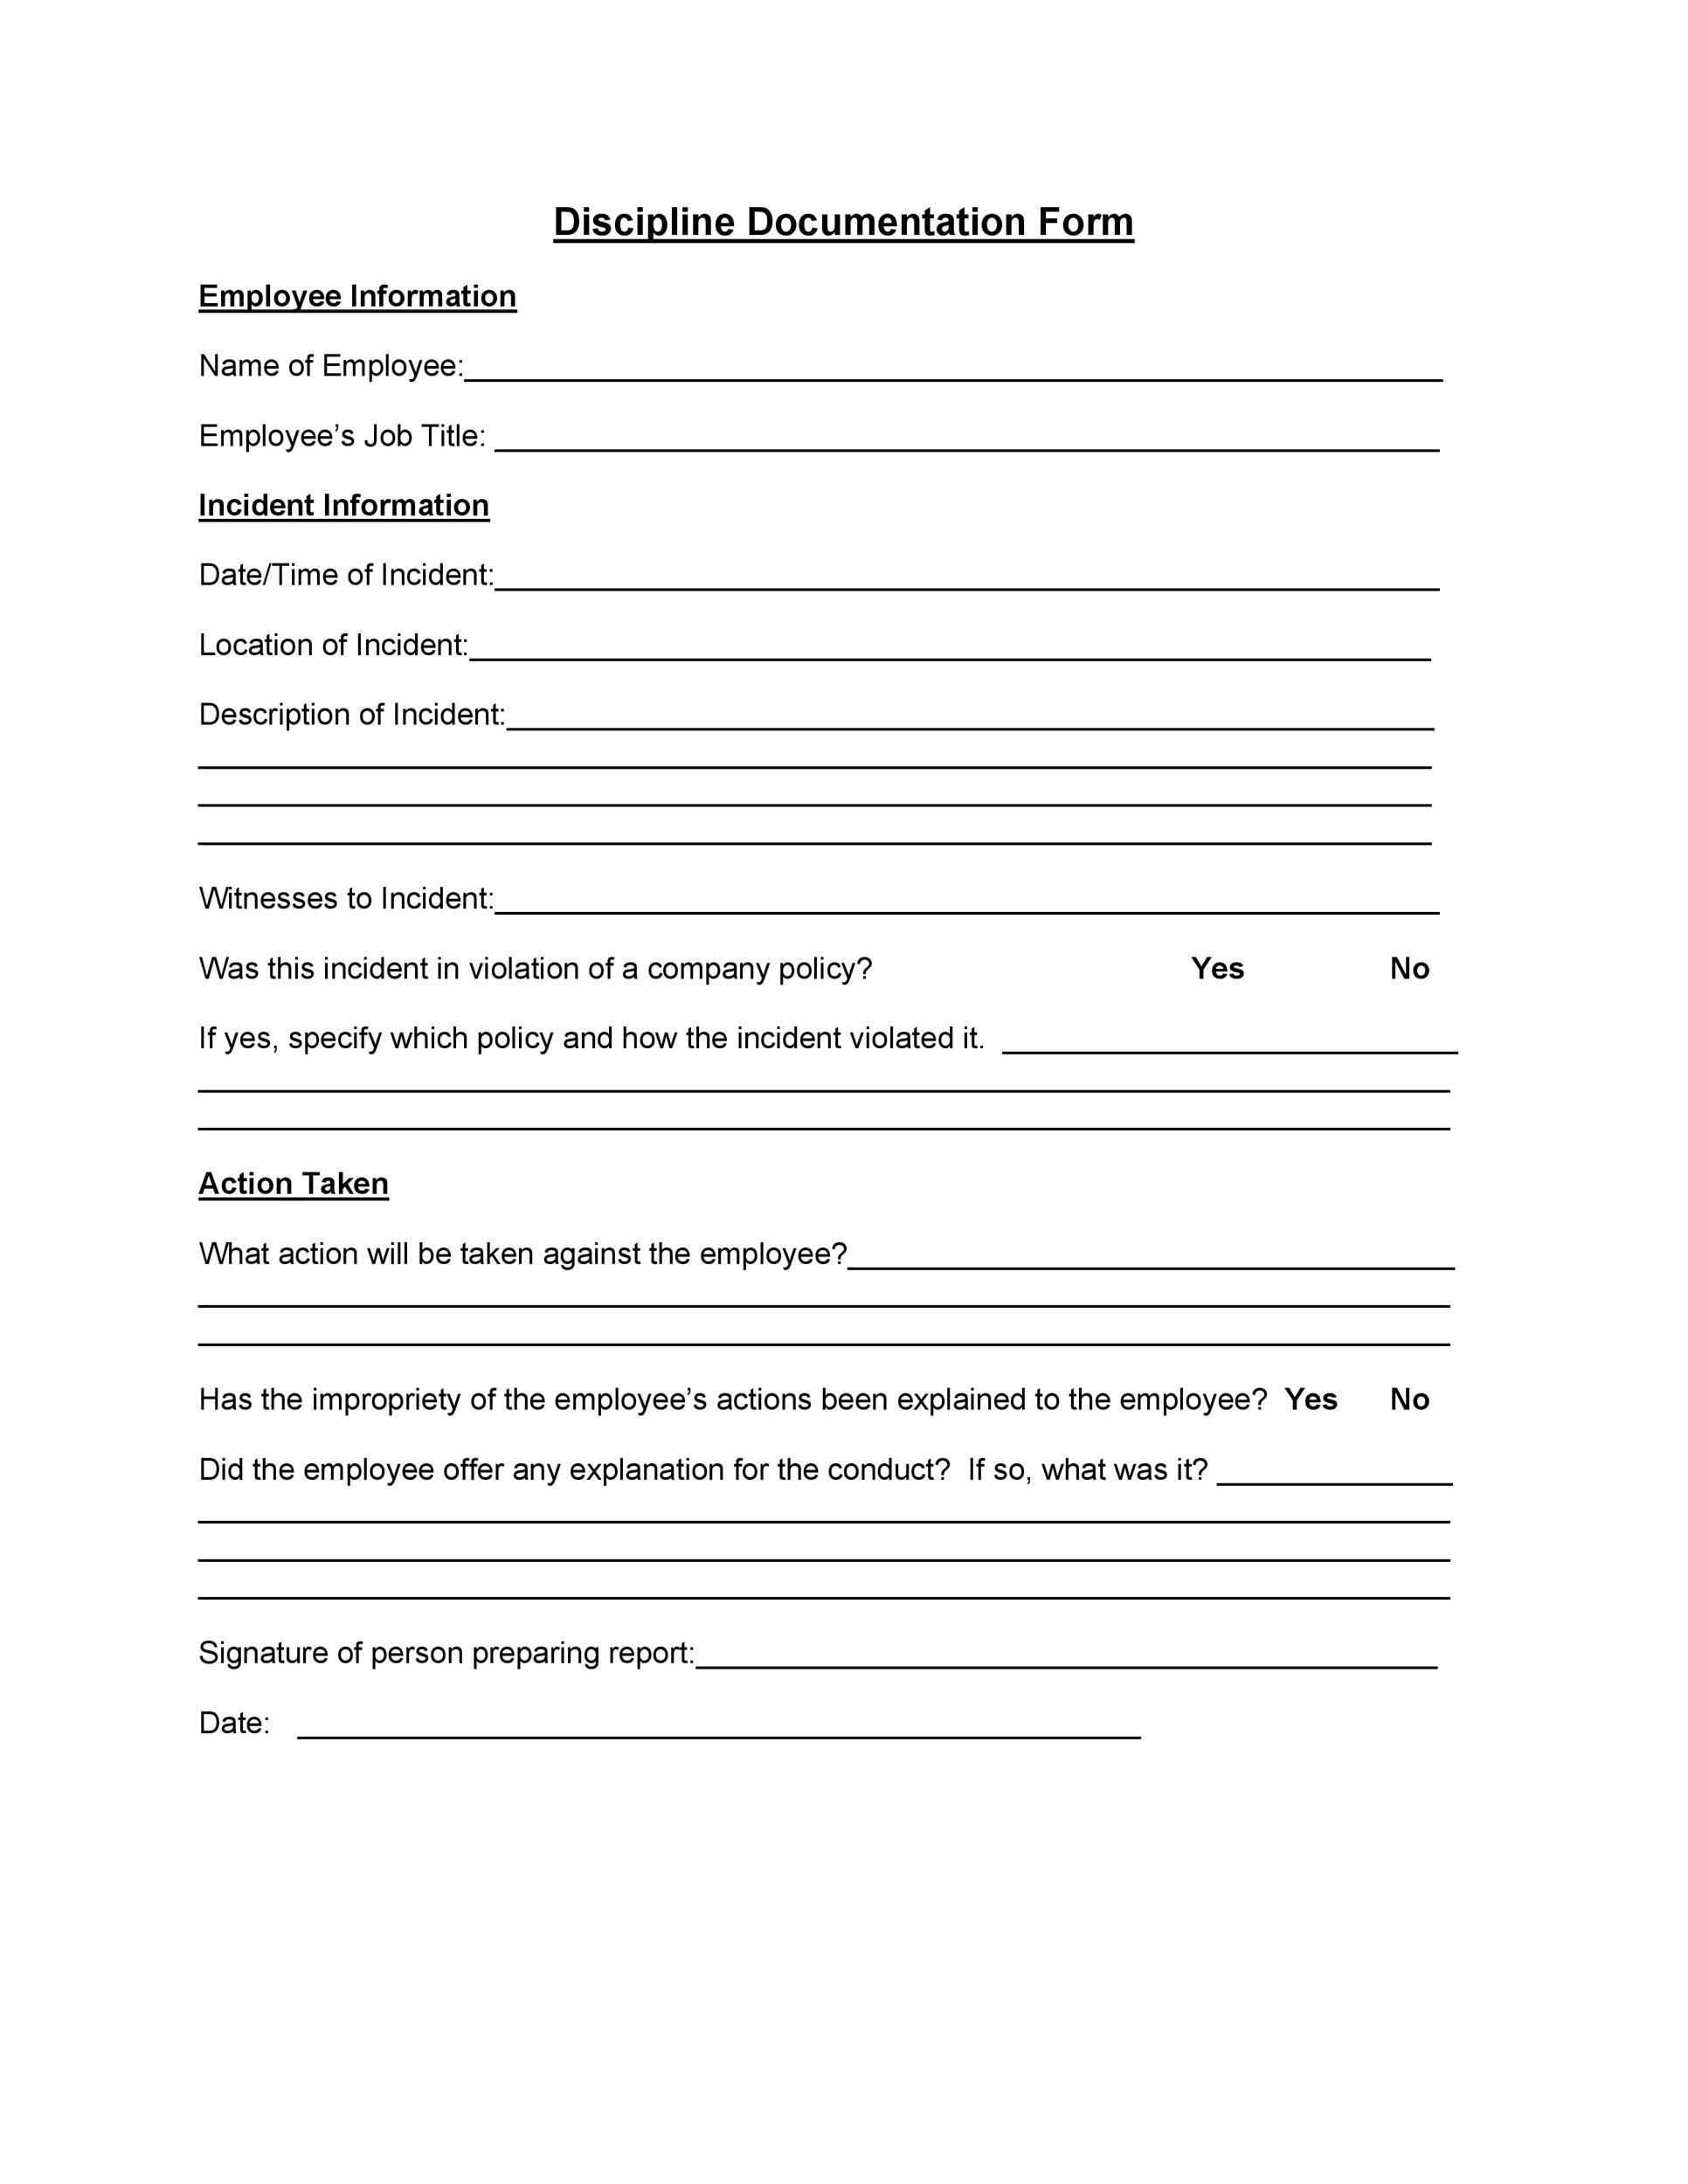 documenting-conversations-with-employees-template-card-template